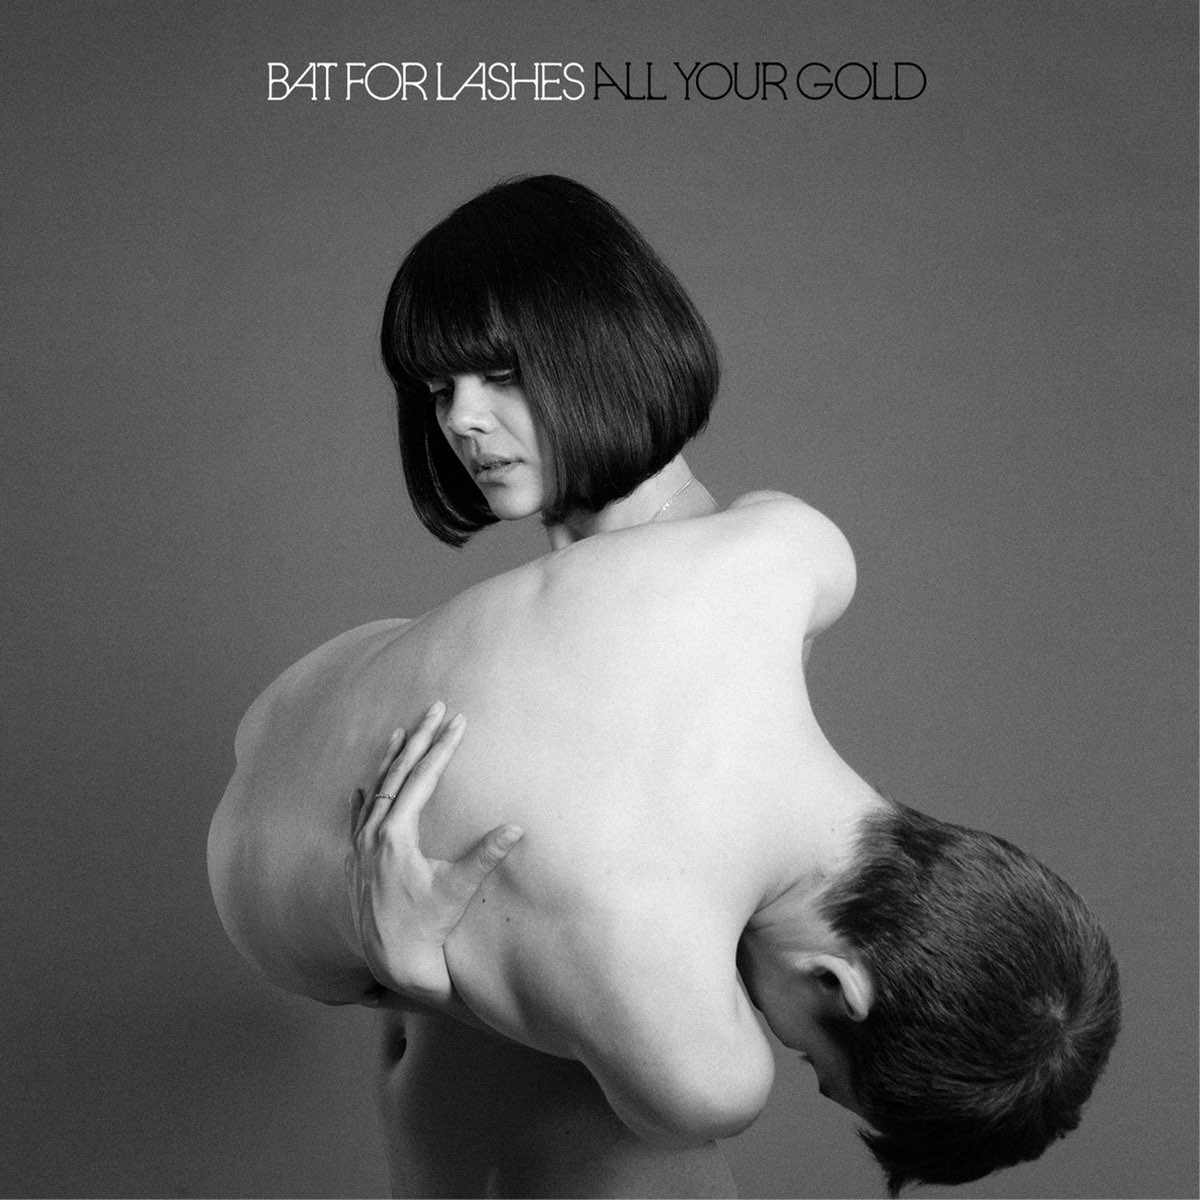 Bat for Lashes All Your Gold cover artwork